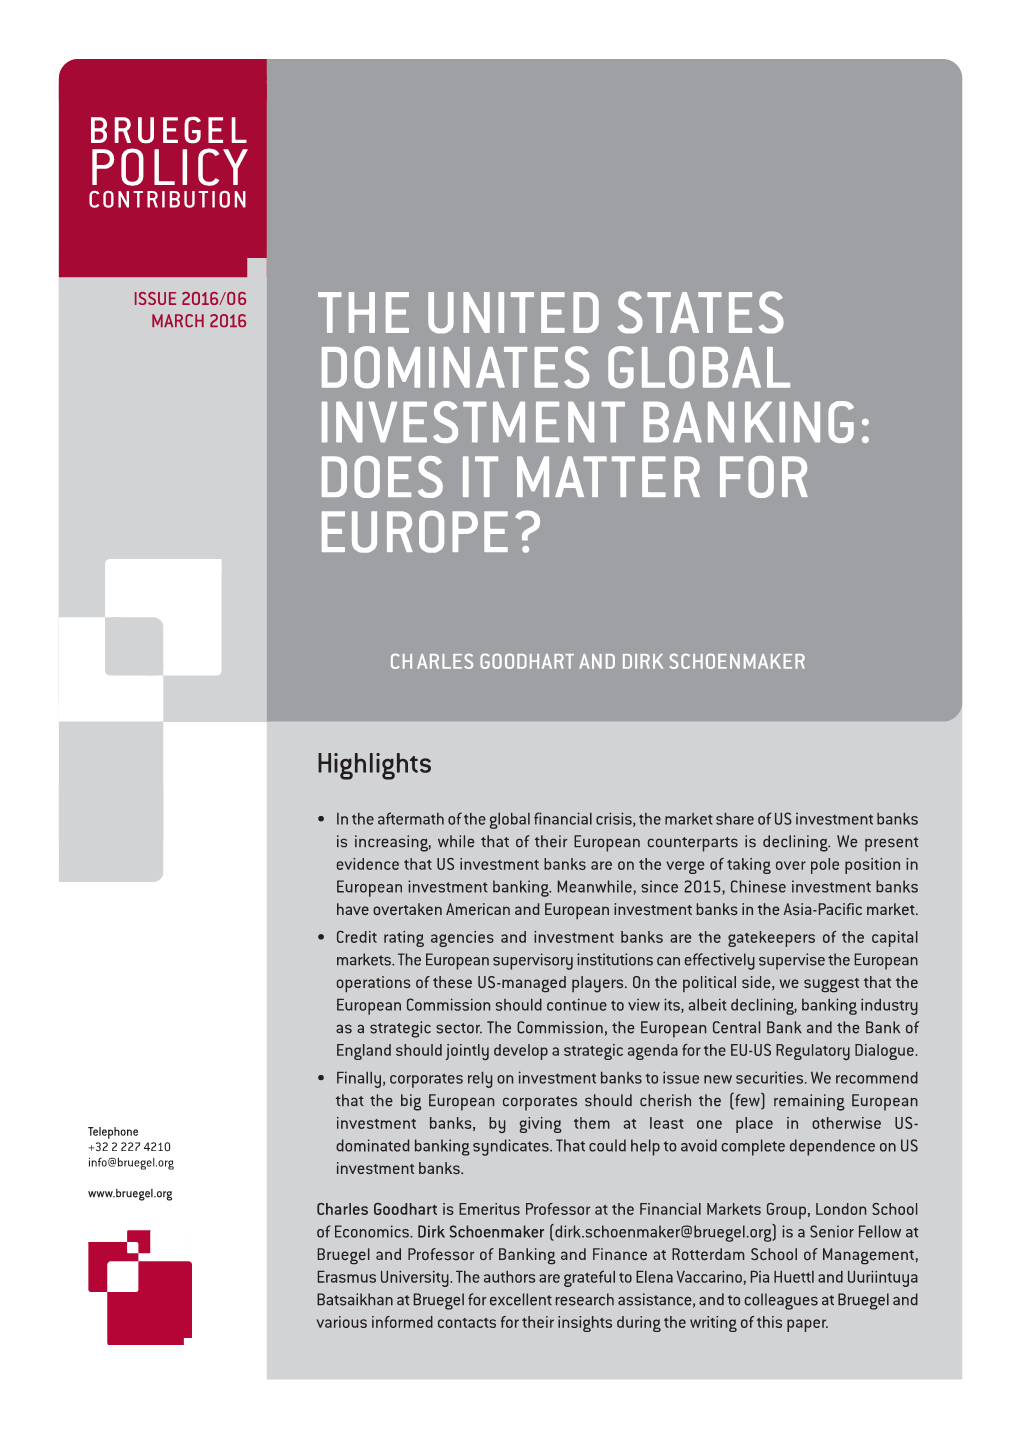 The United States Dominates Global Investment Banking: Does It Matter for Europe?